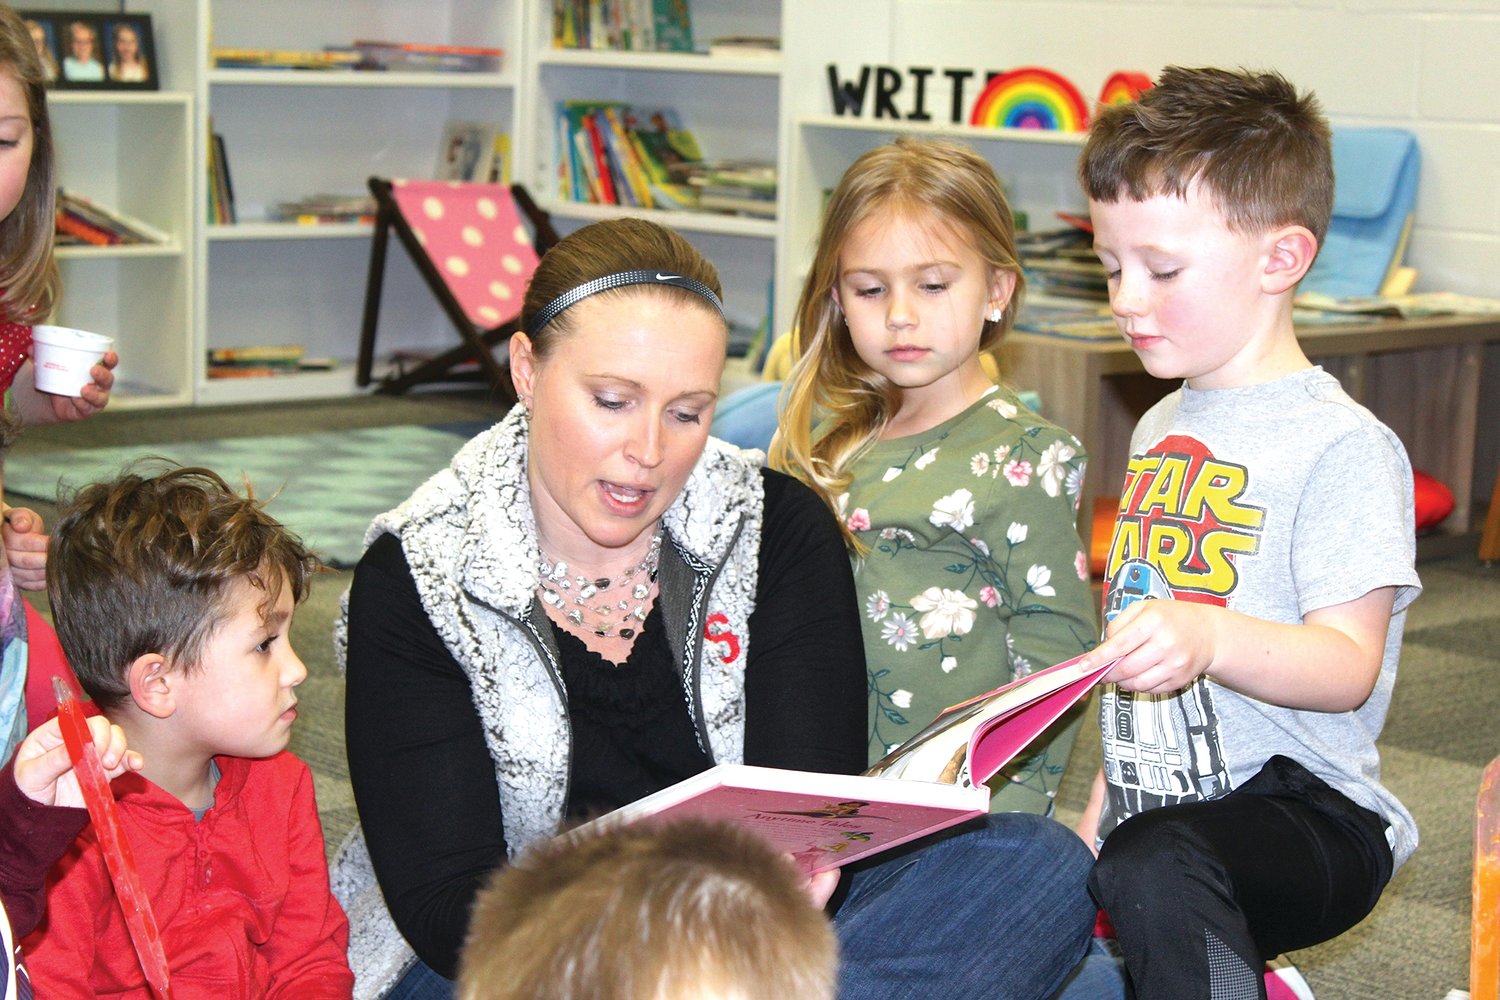 Little Mountie Preschool Instructor Kelly Shannon, center, reads a story to interested students Wednesday at Walnut Elementary.